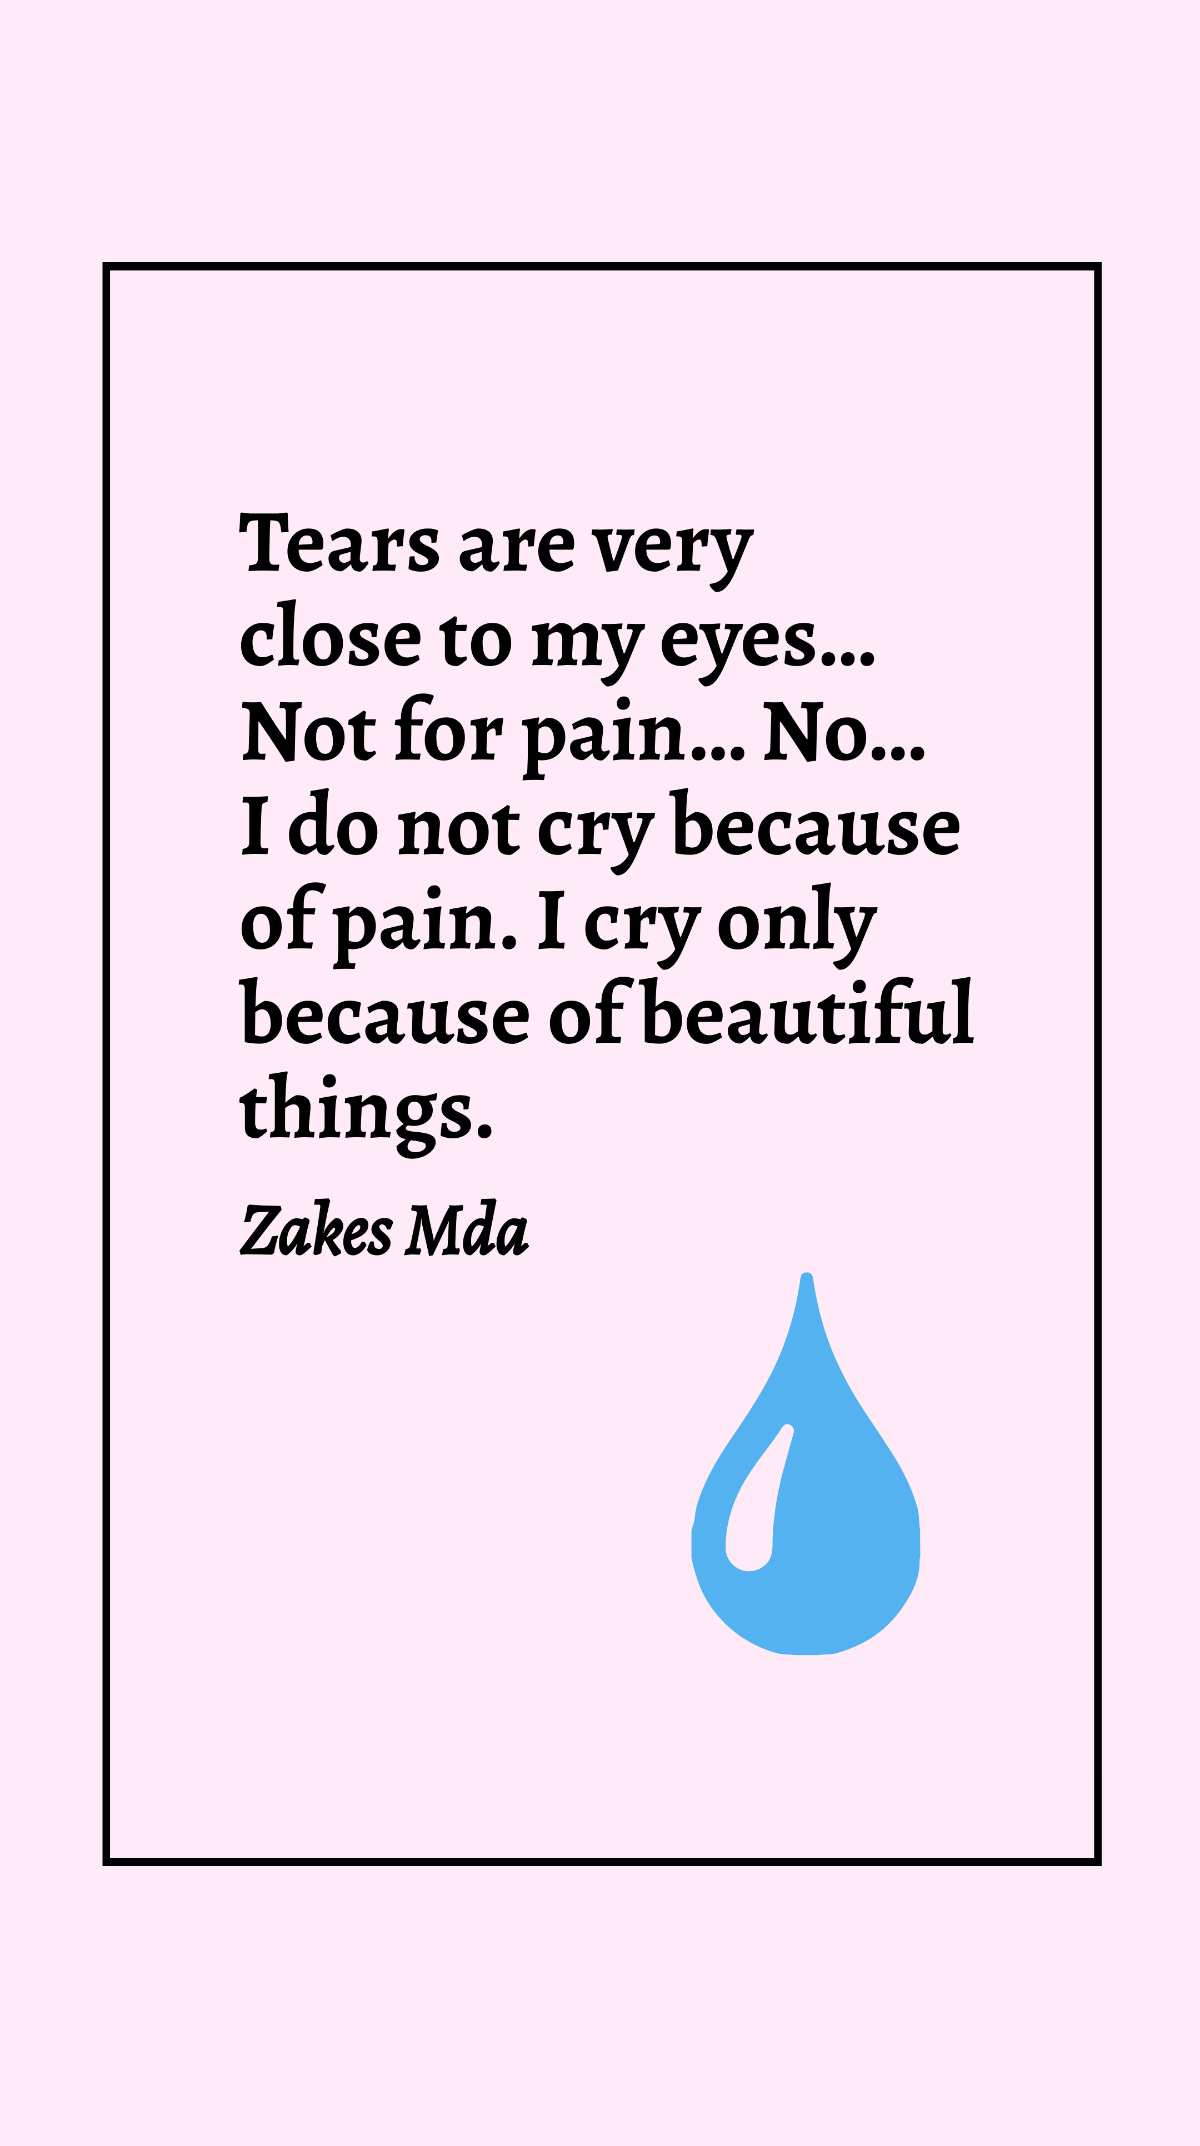 Zakes Mda - Tears are very close to my eyes… Not for pain… no… I do not cry because of pain. I cry only because of beautiful things.